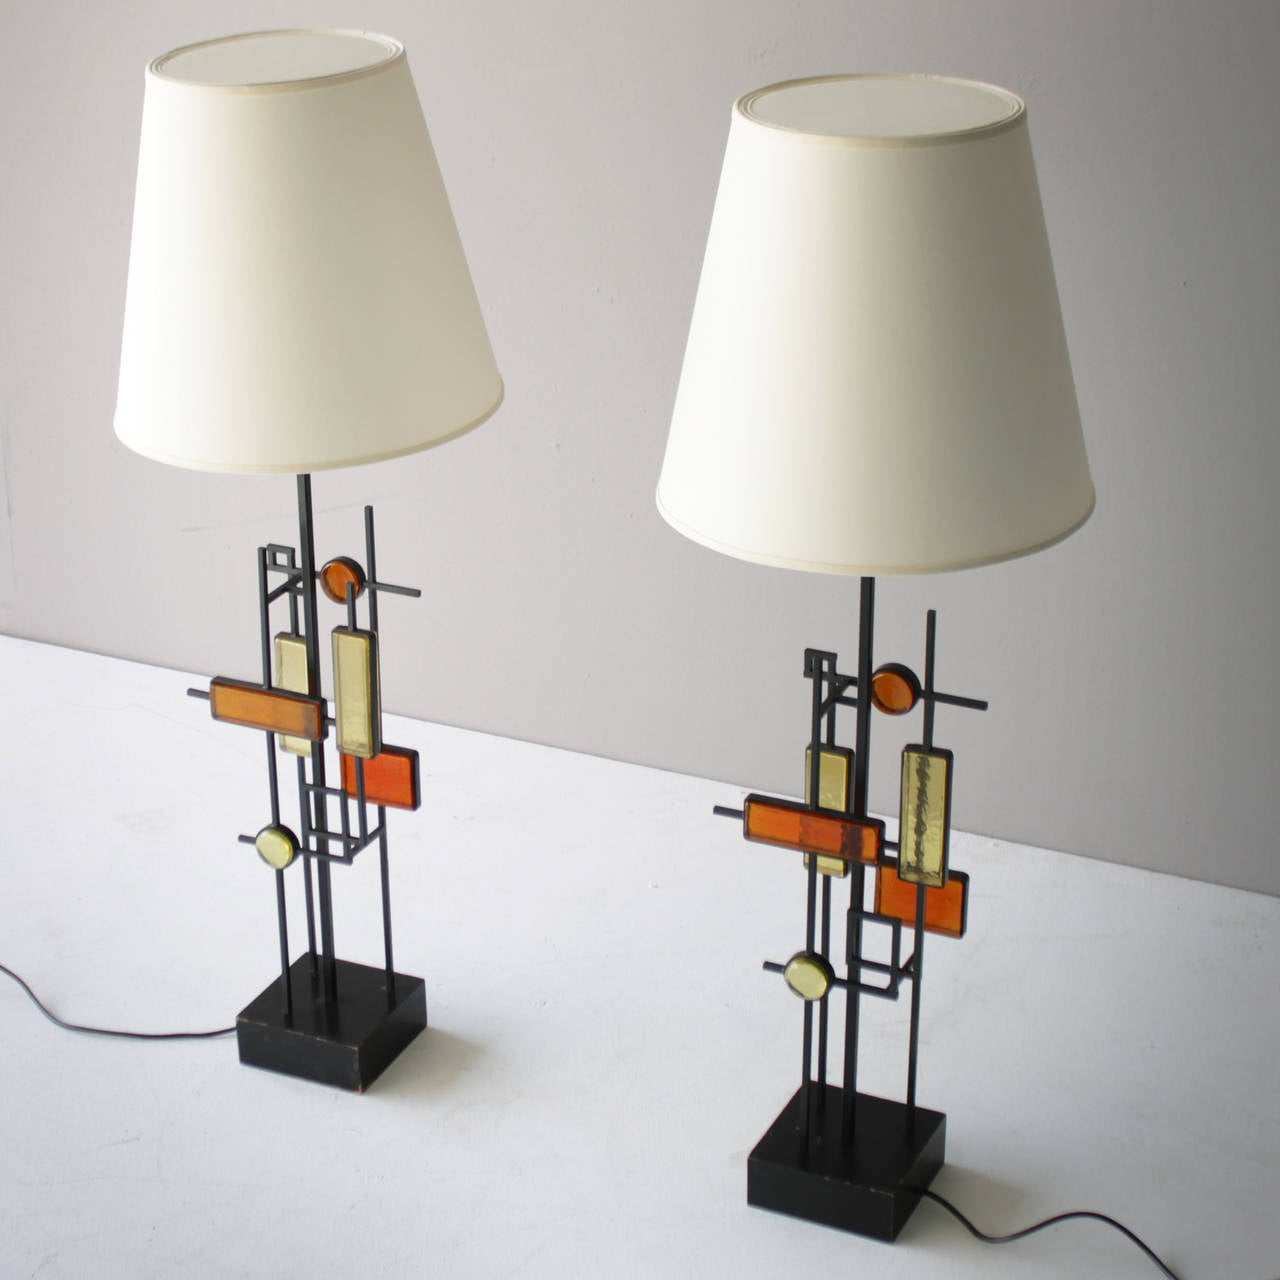 Ebonized Pair of Lamps by Svend Aage Holm Sorensen